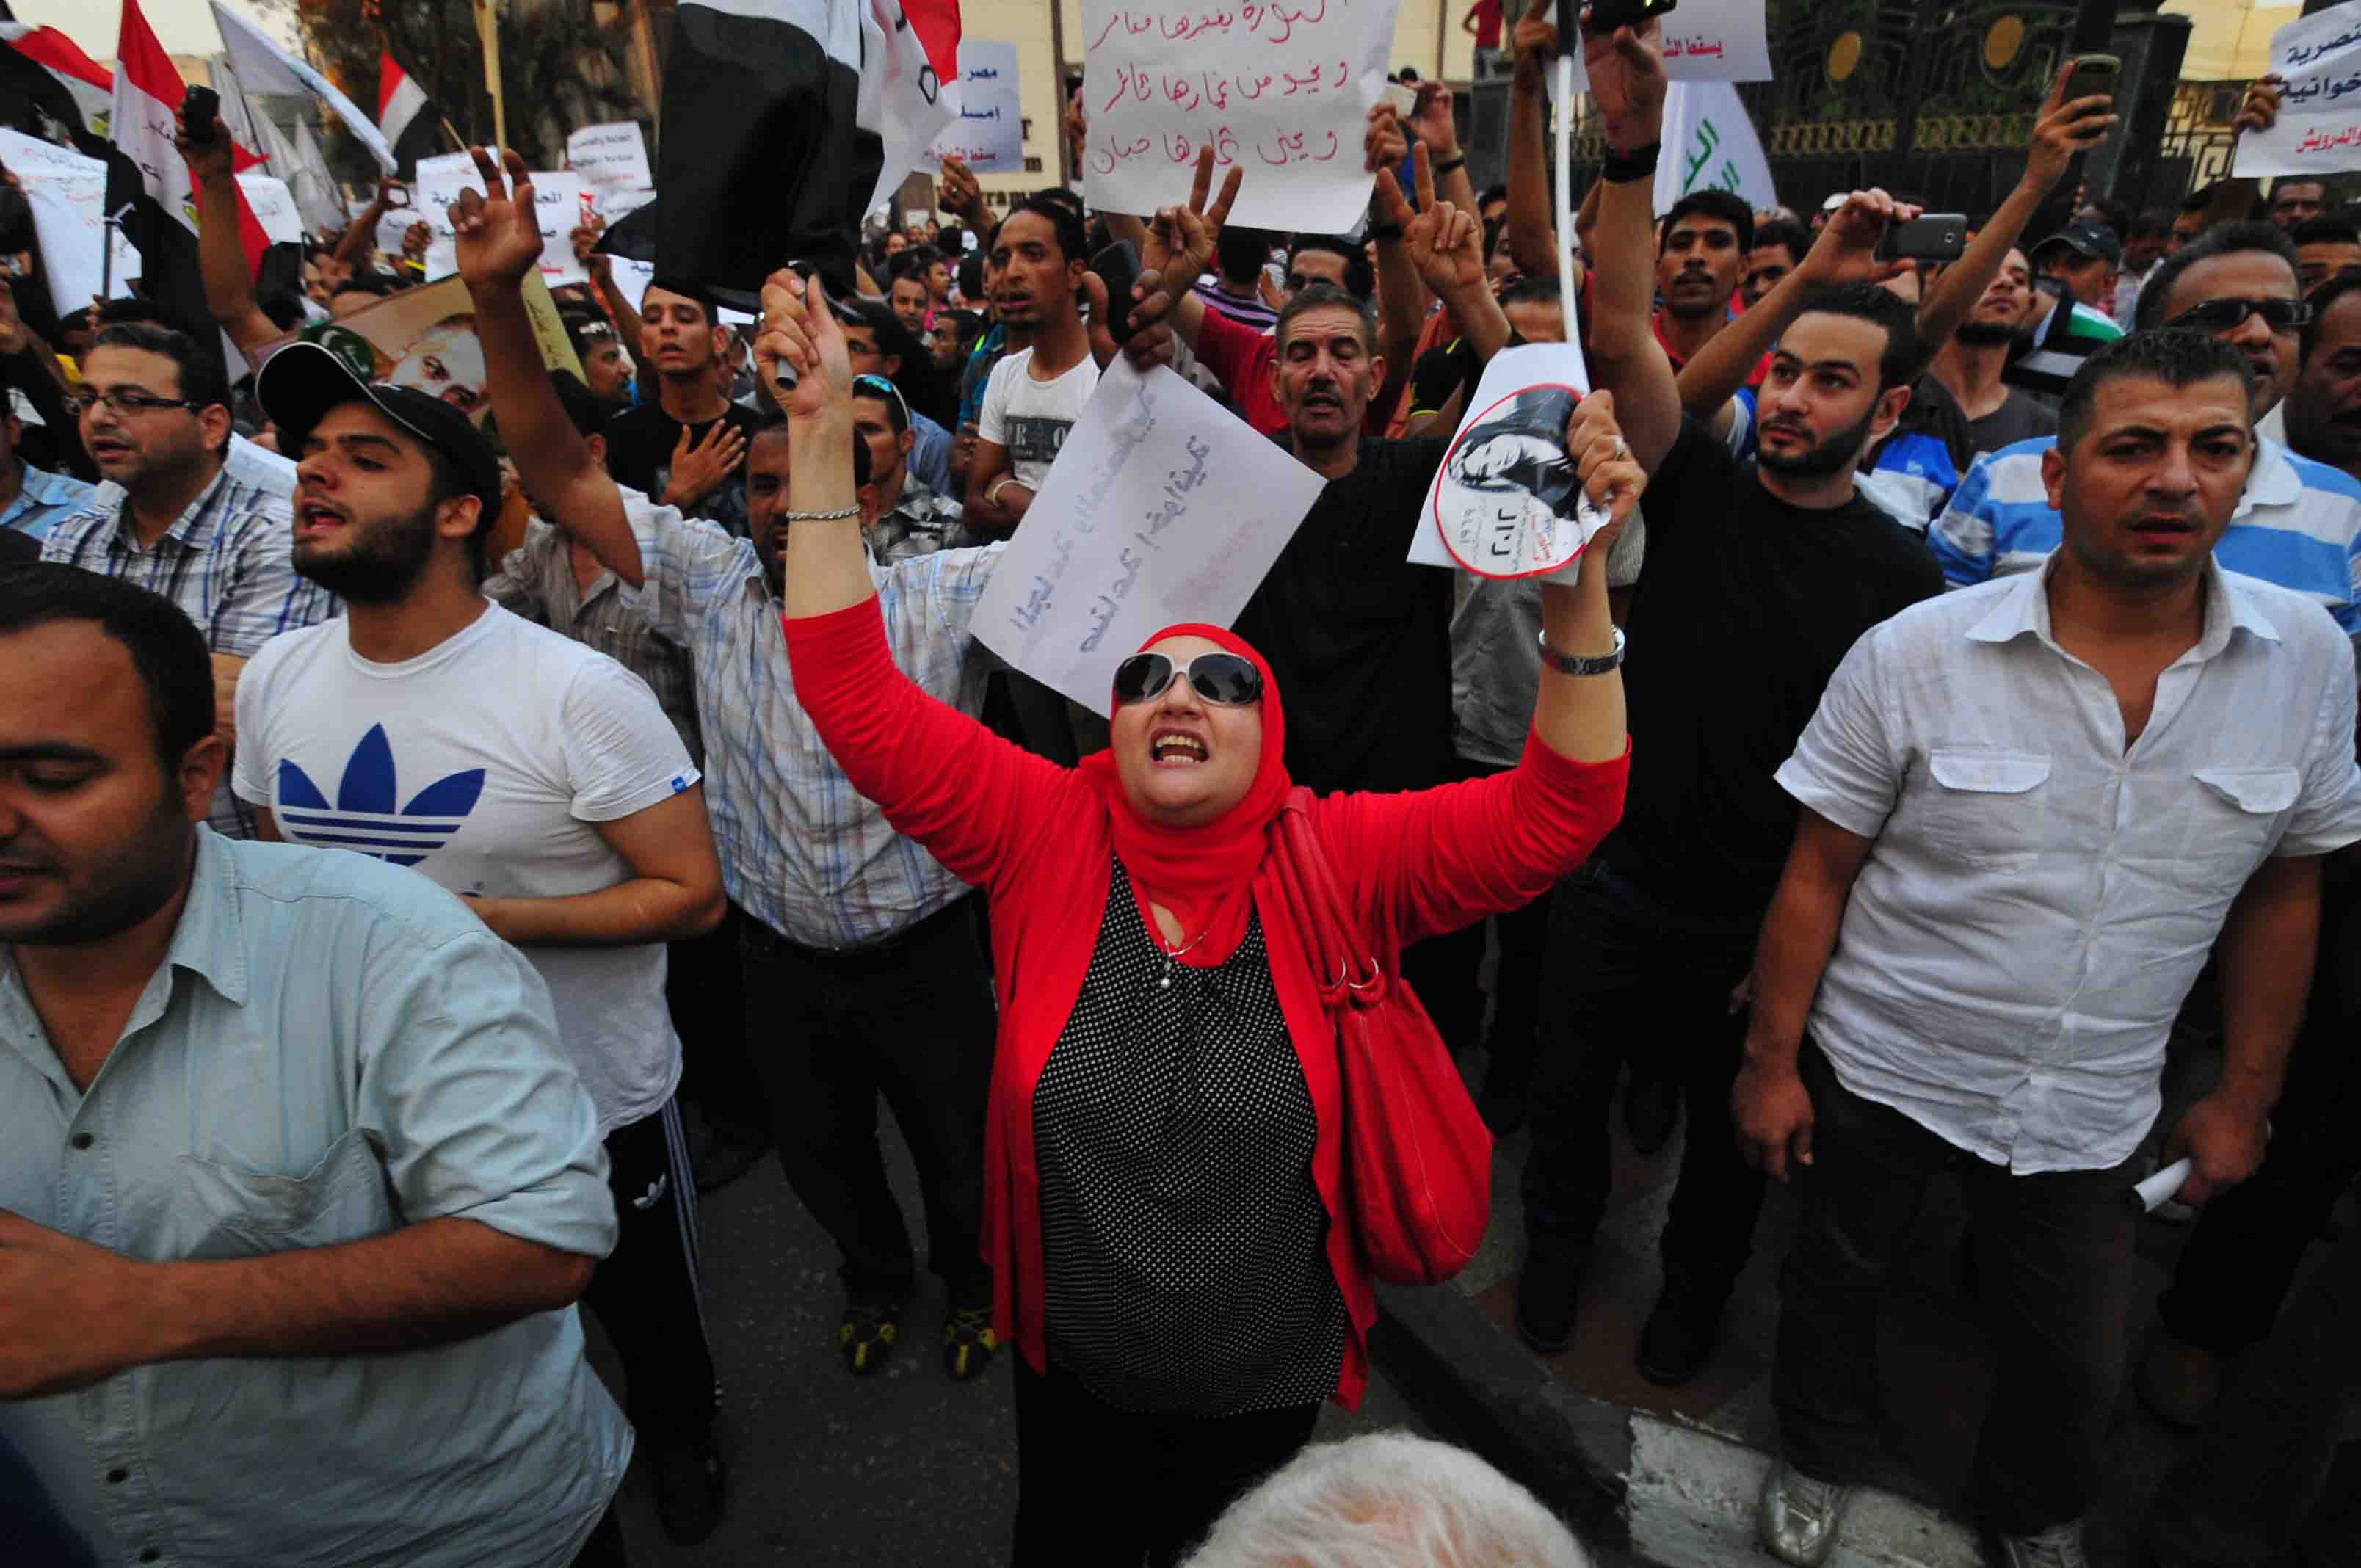 A female protester shouts during Friday’s demonstrations. (Photo by Hassan Ibrahim)